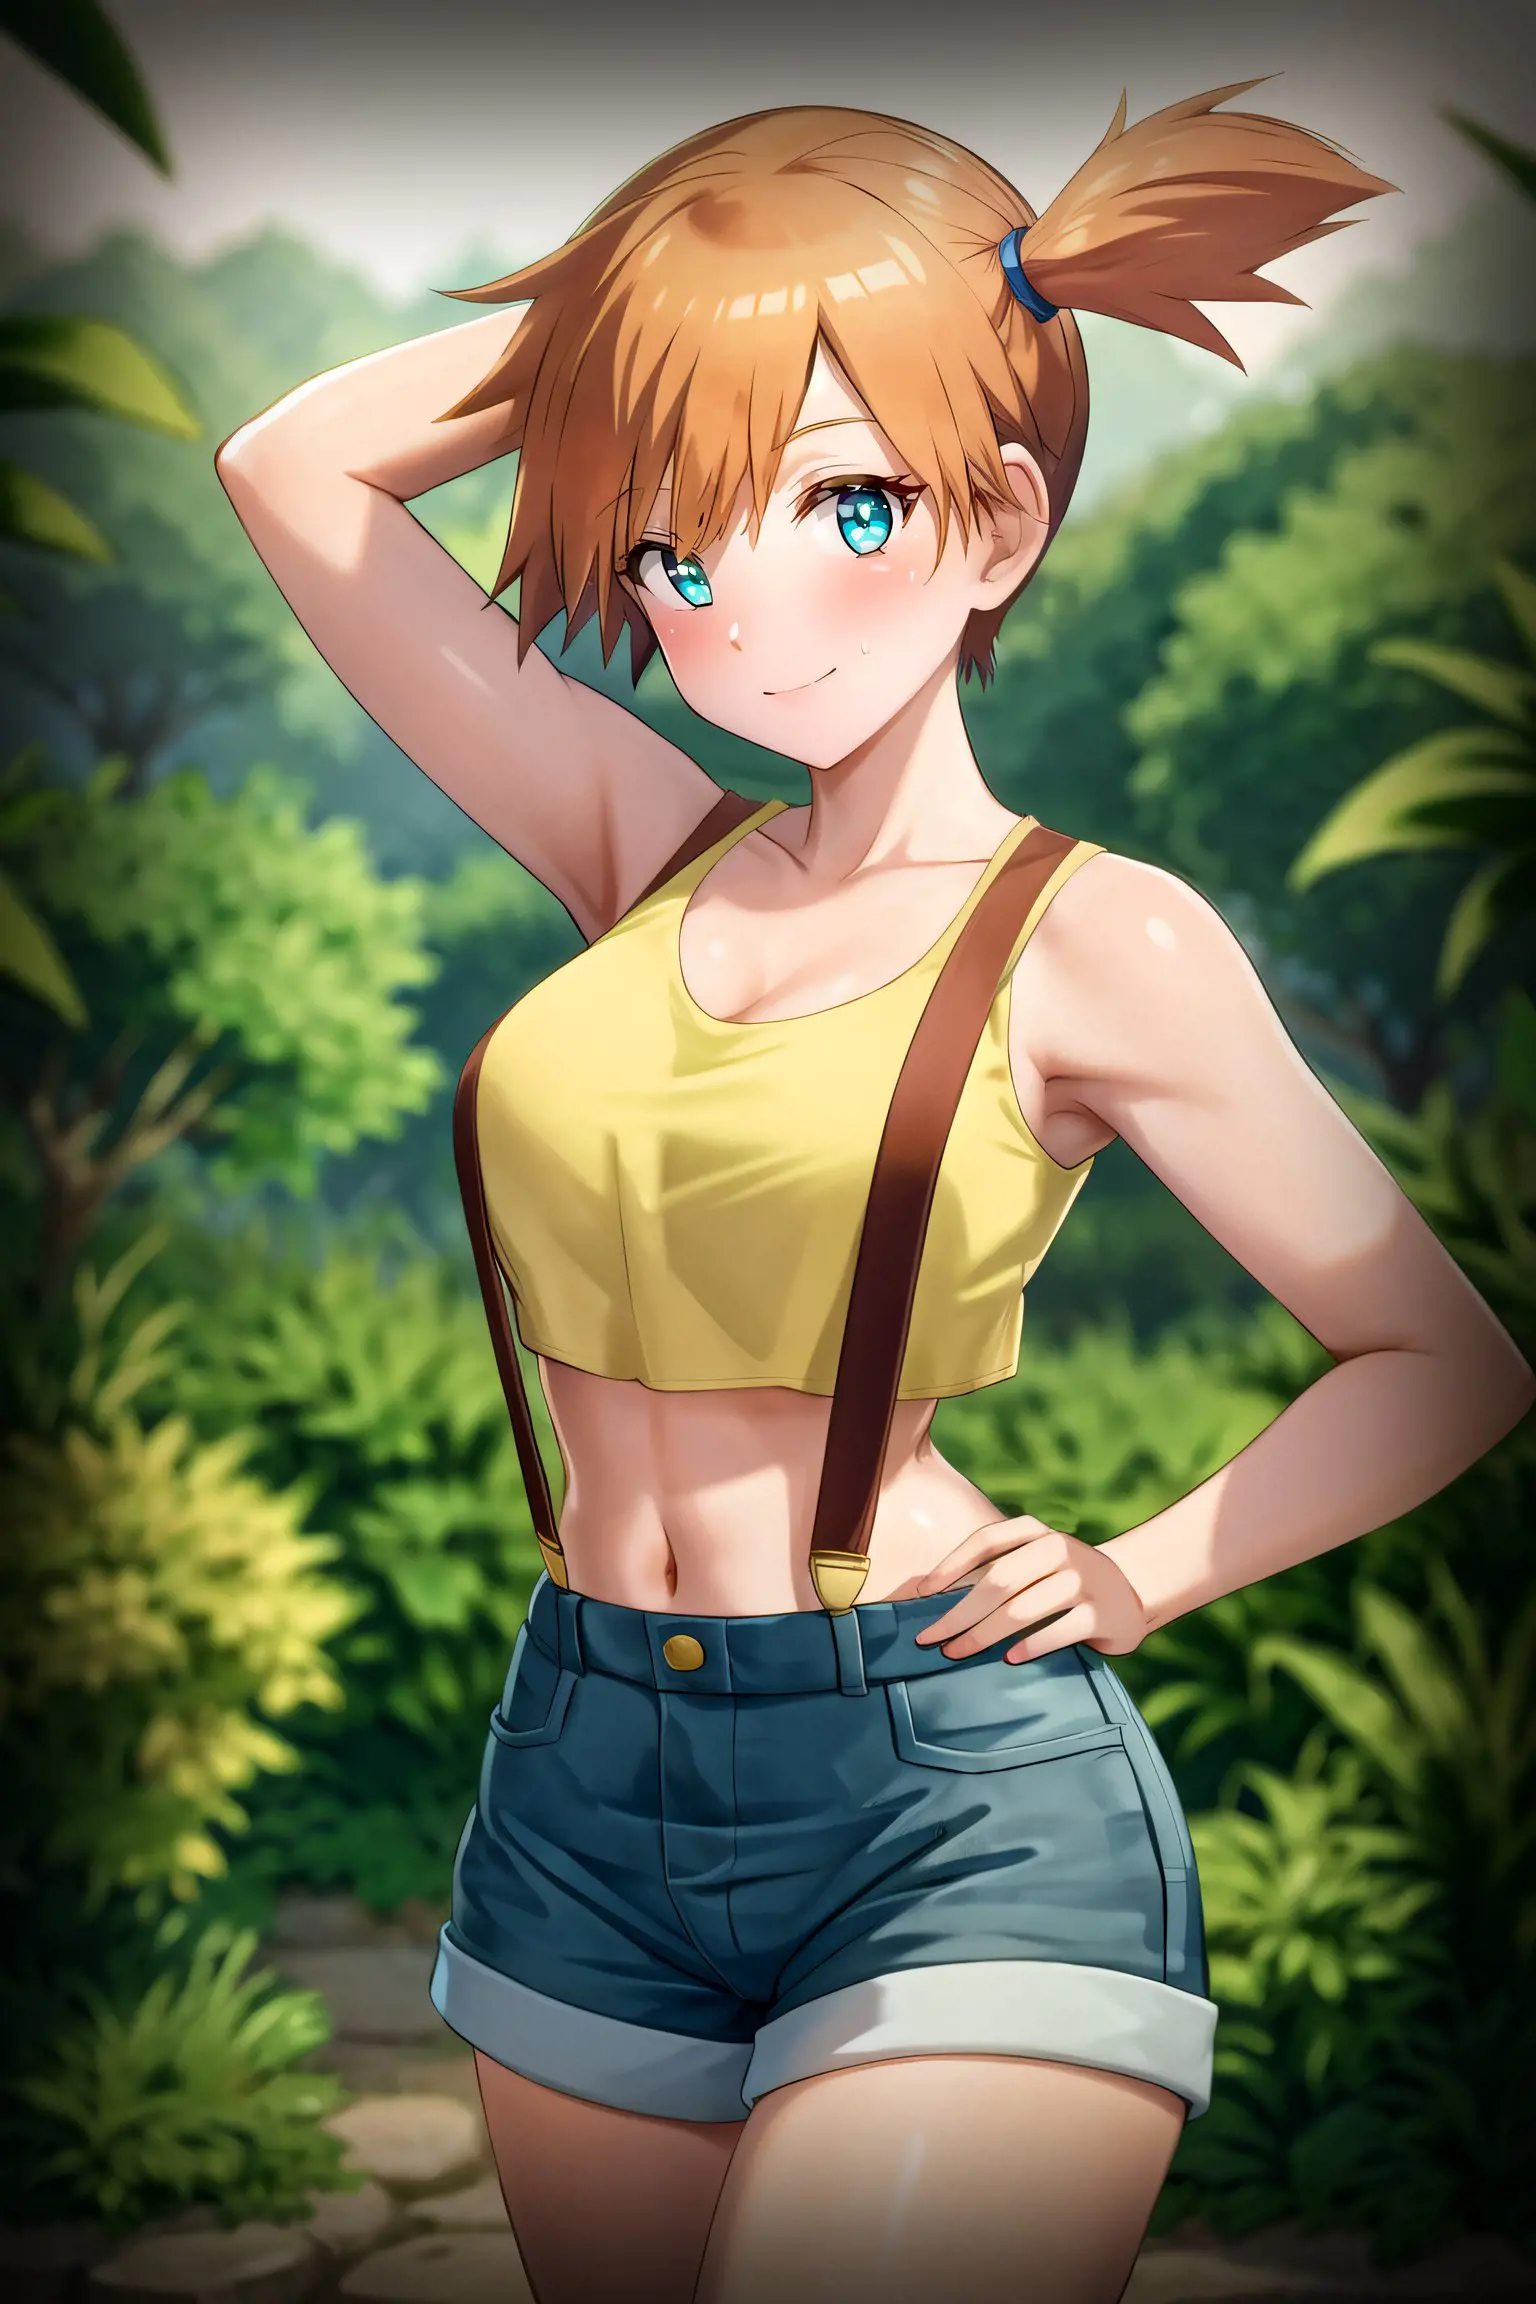 Misty From Pokemon Posing With Her One Hand On Waist And Another On Her Head